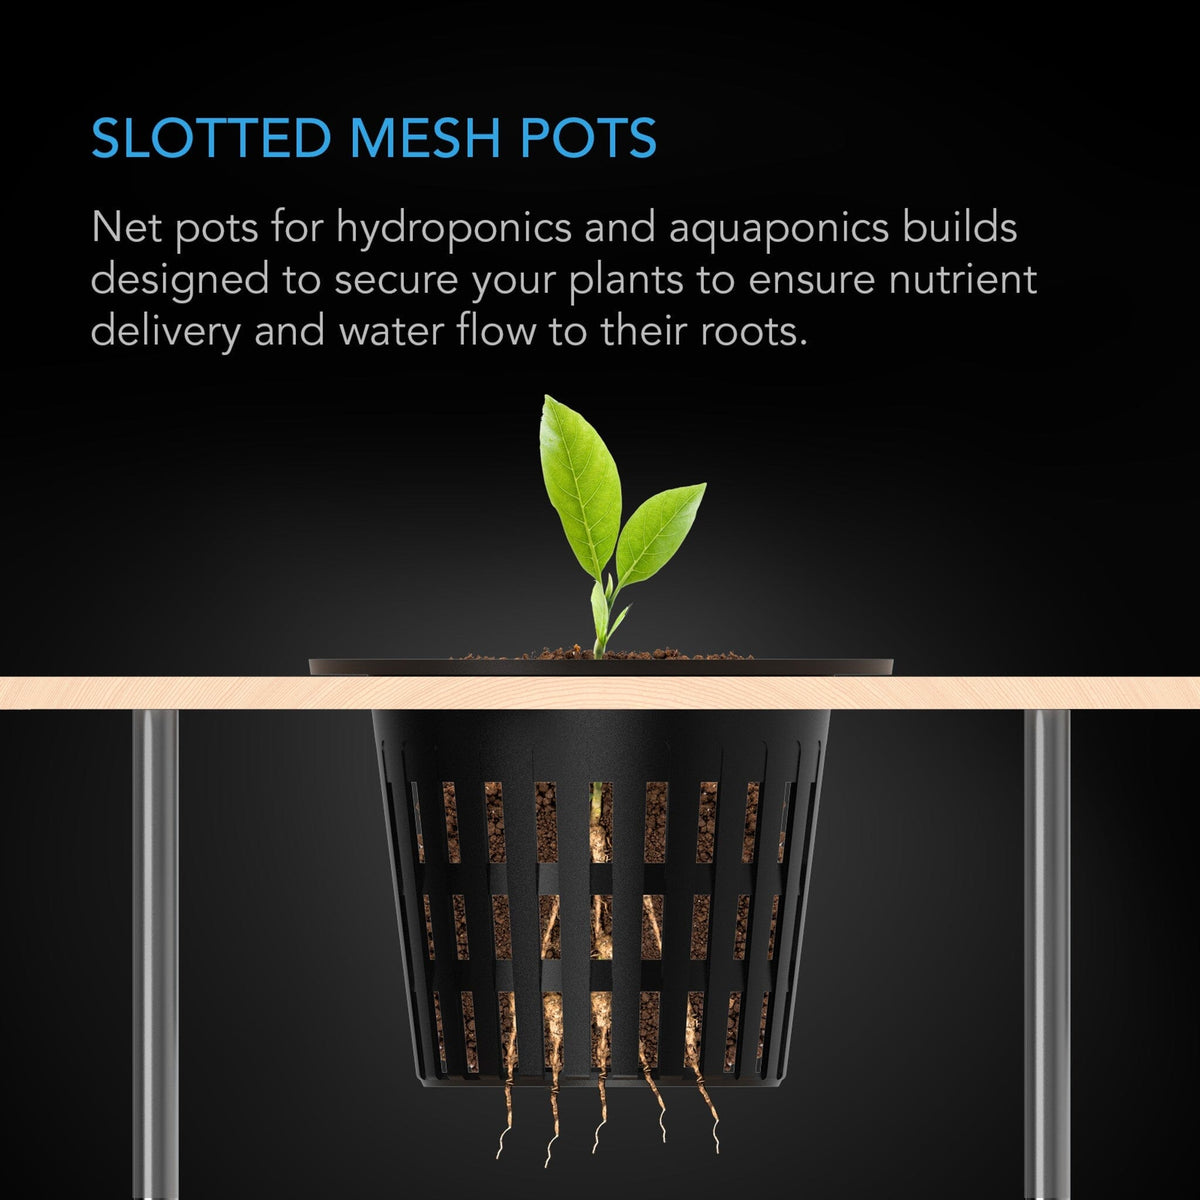 Slotted Mesh pots